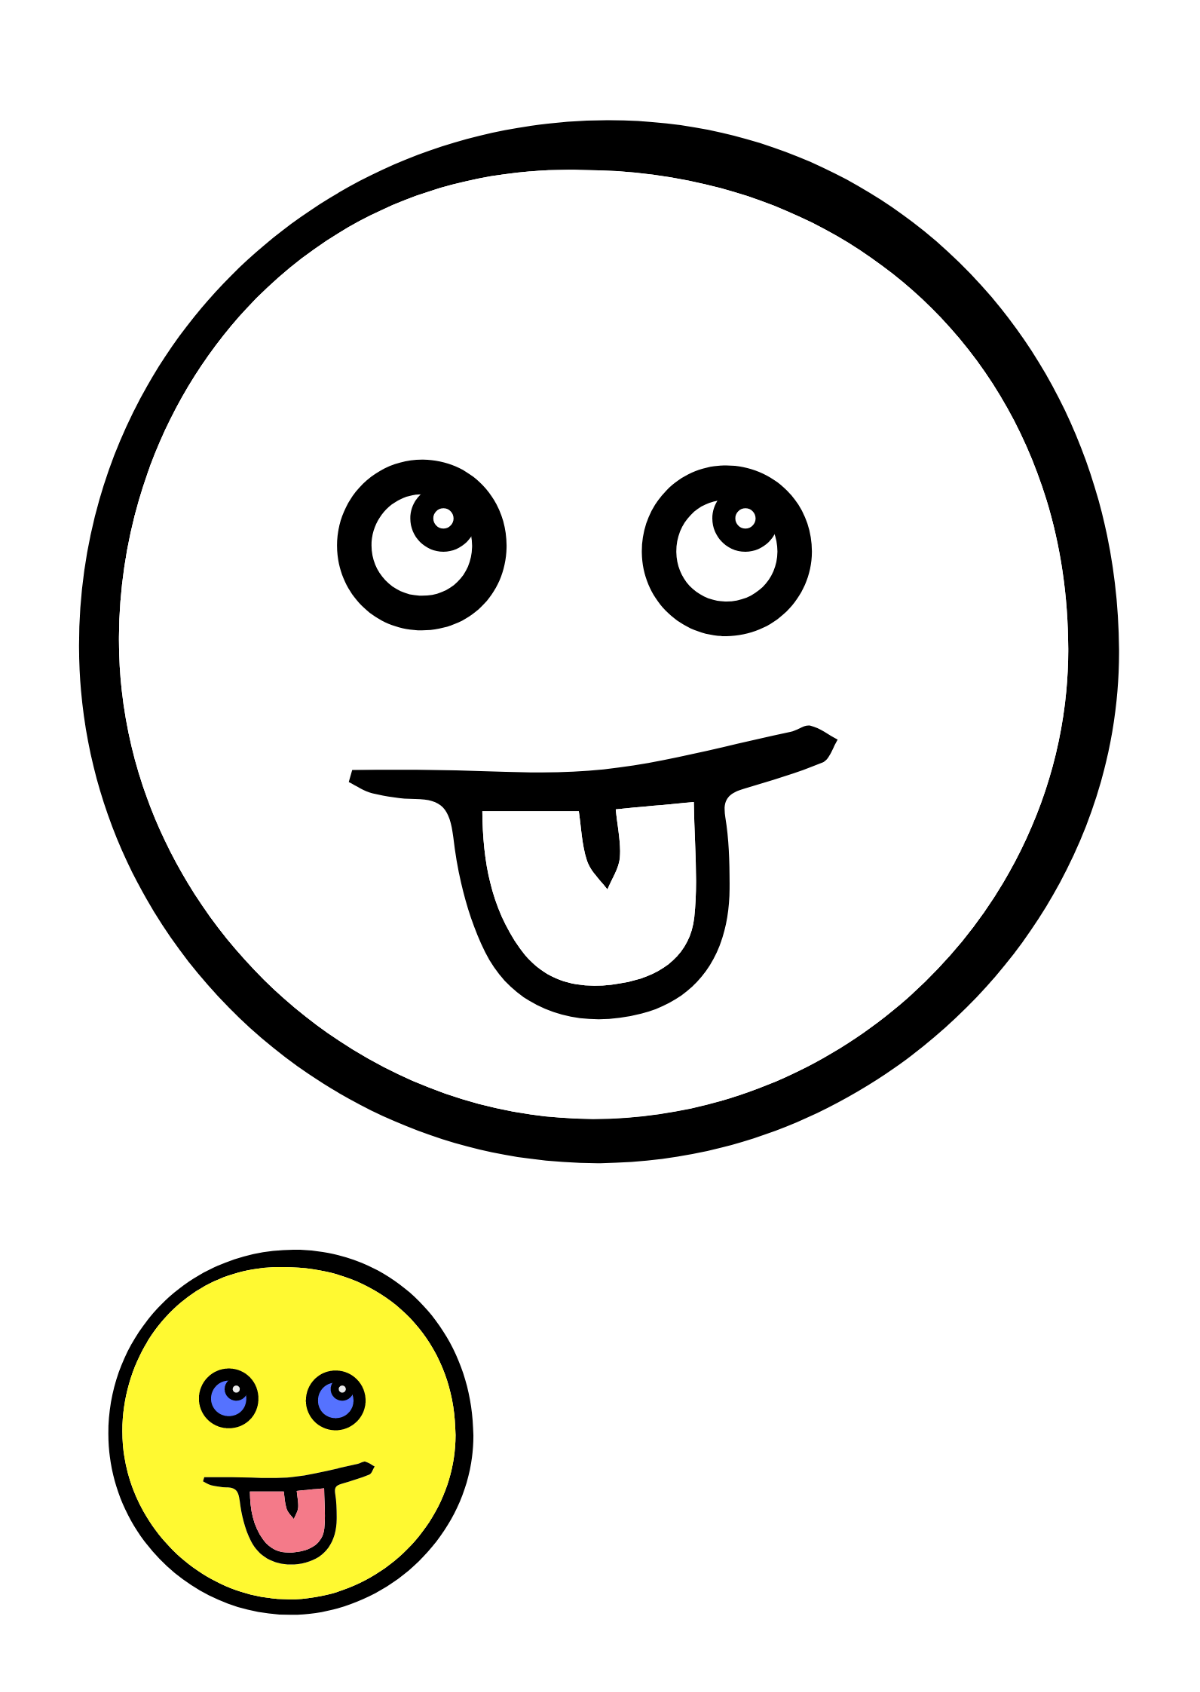 Free Doodle Smiley coloring page Template